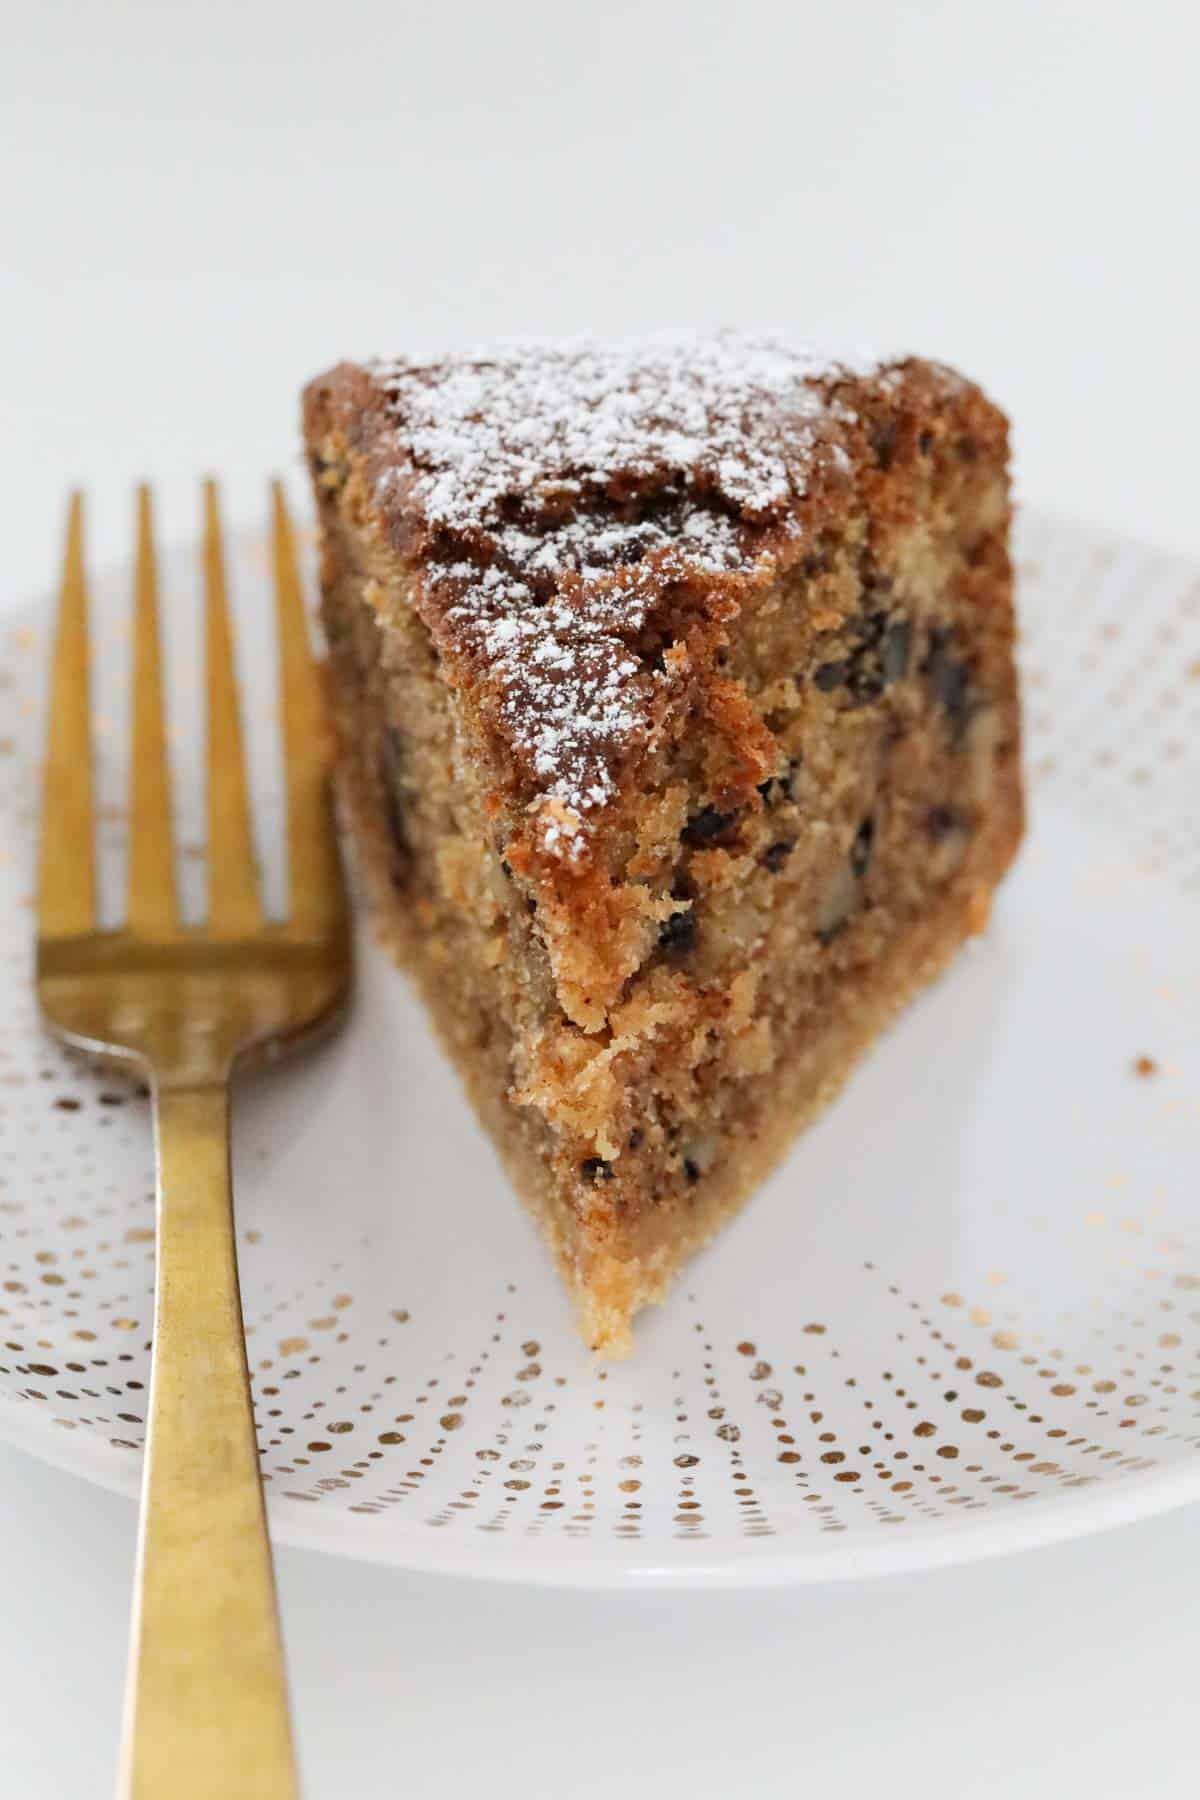 A serve of nutmeg cake showing the chopped walnuts throughout.